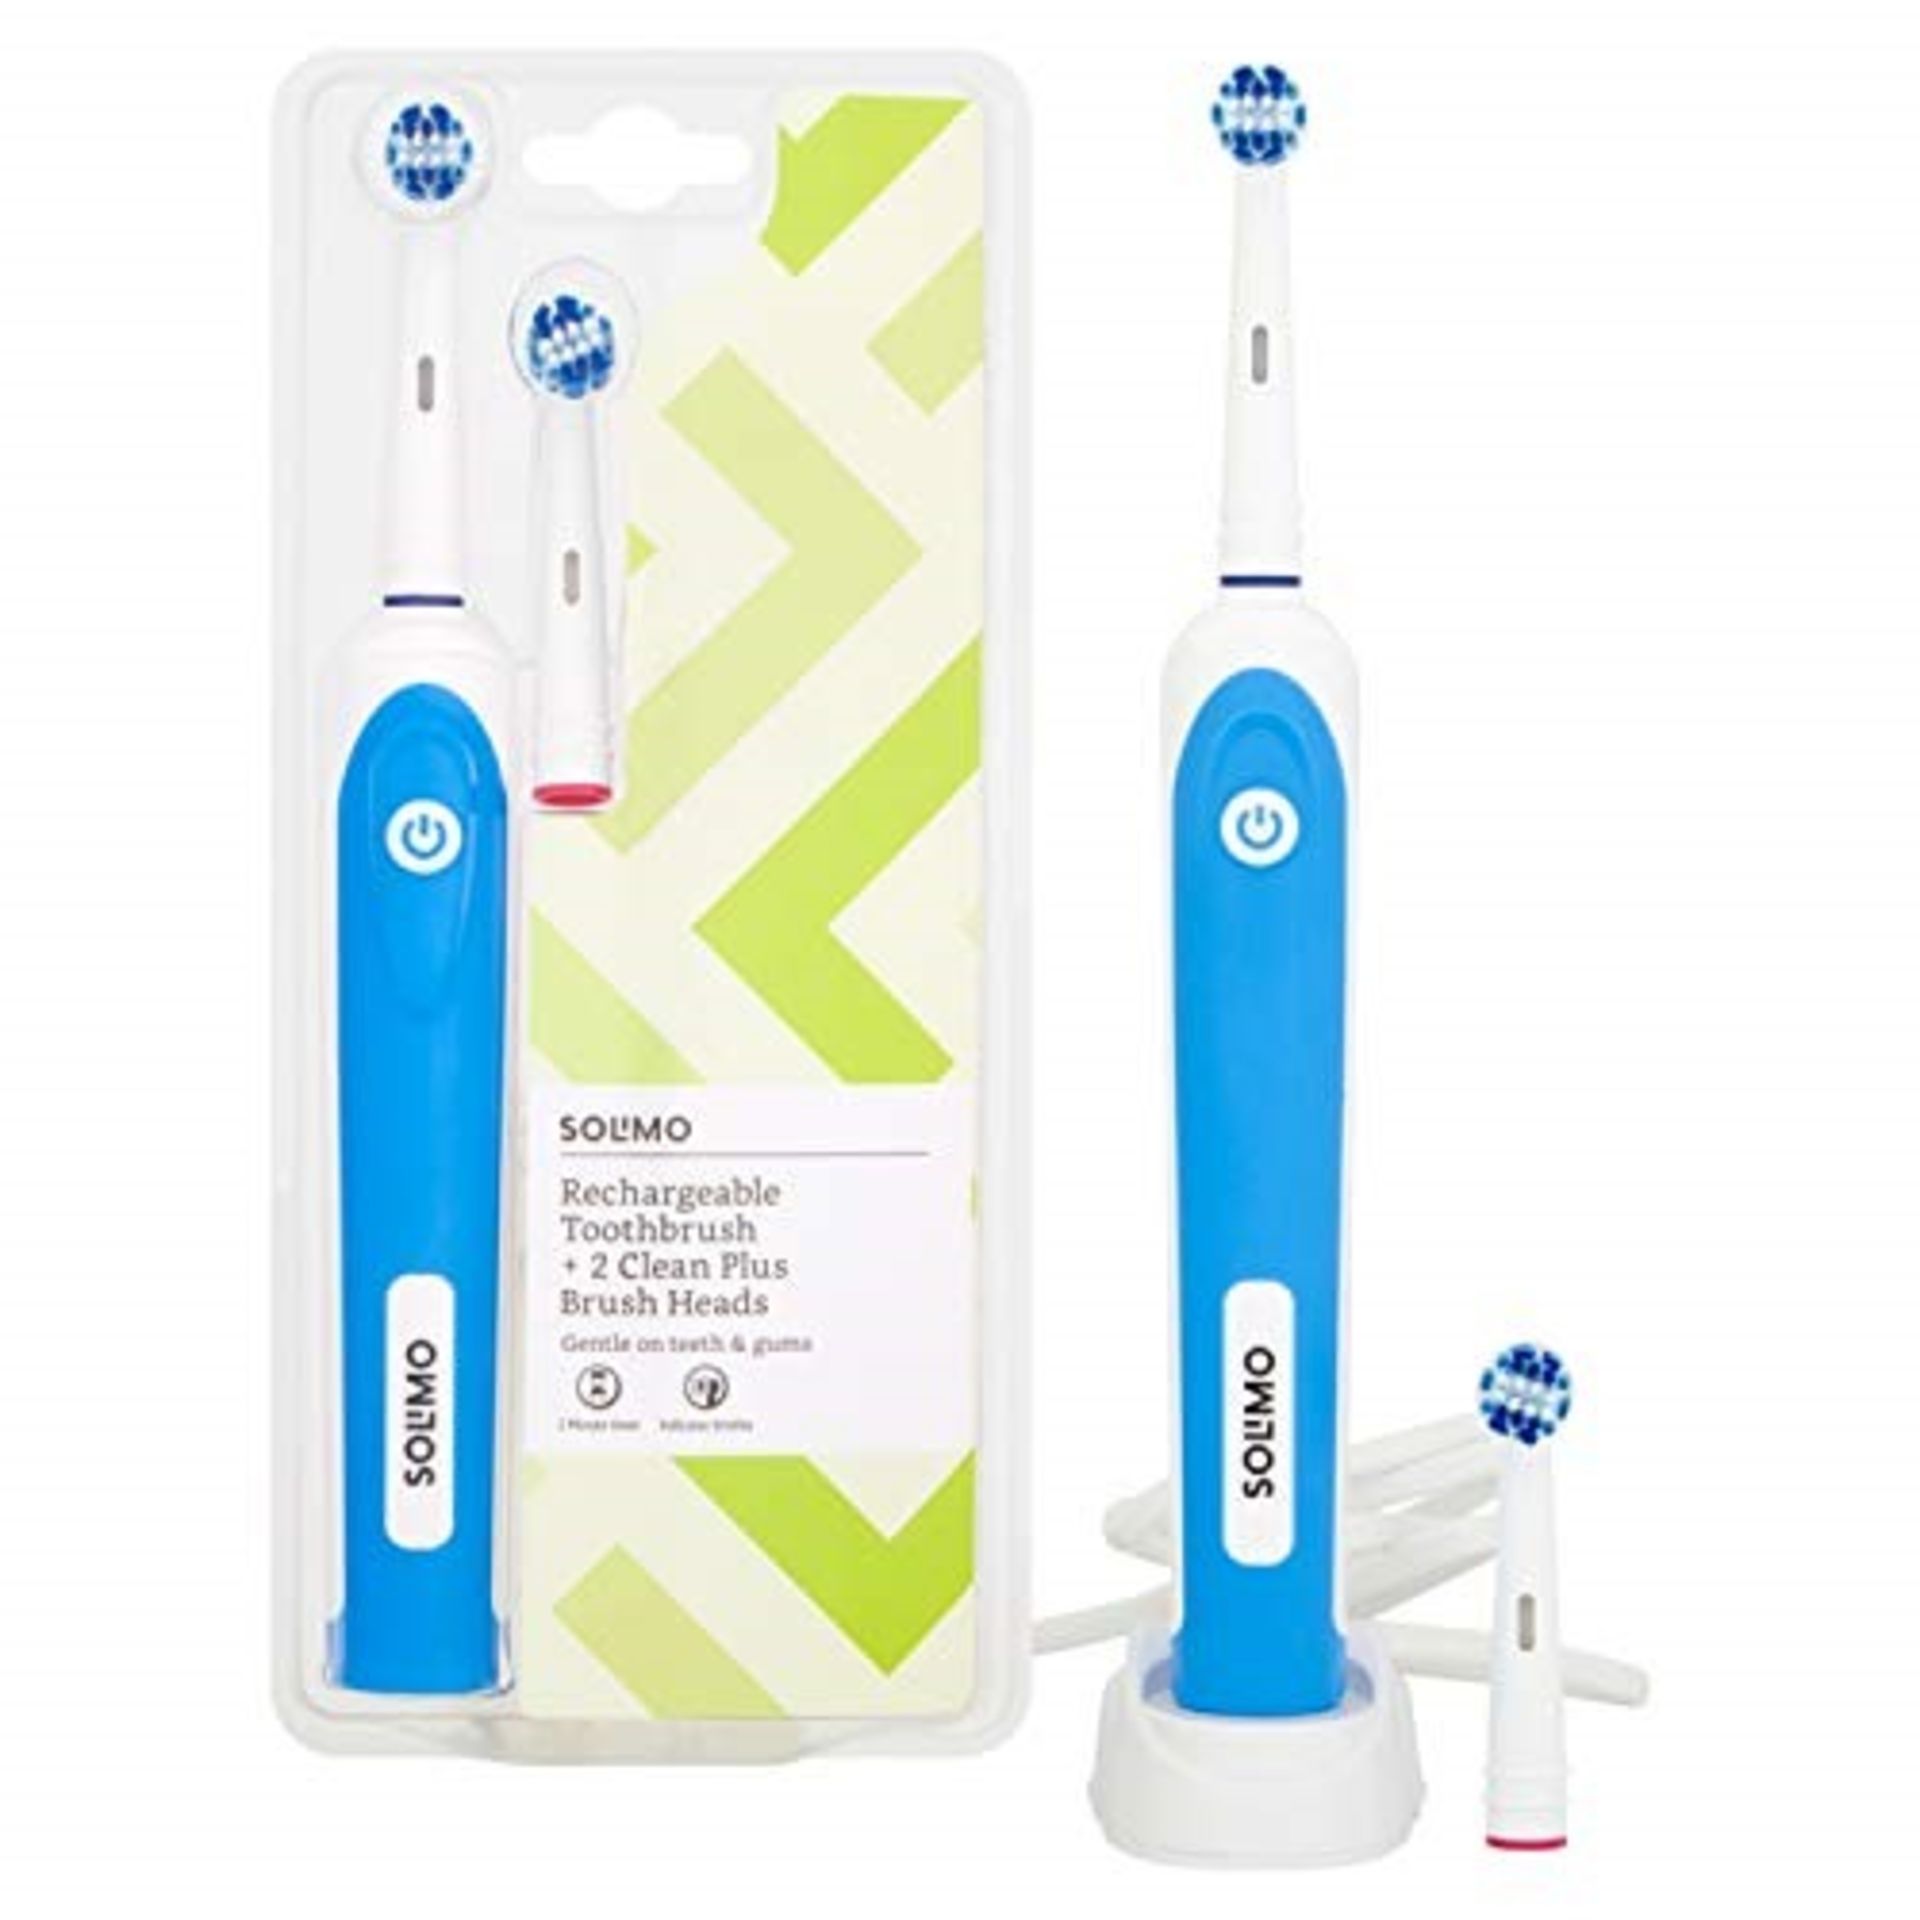 Amazon Brand - Solimo Electric Rechargeable Toothbrush + 2 Clean Plus Brush Heads (wit